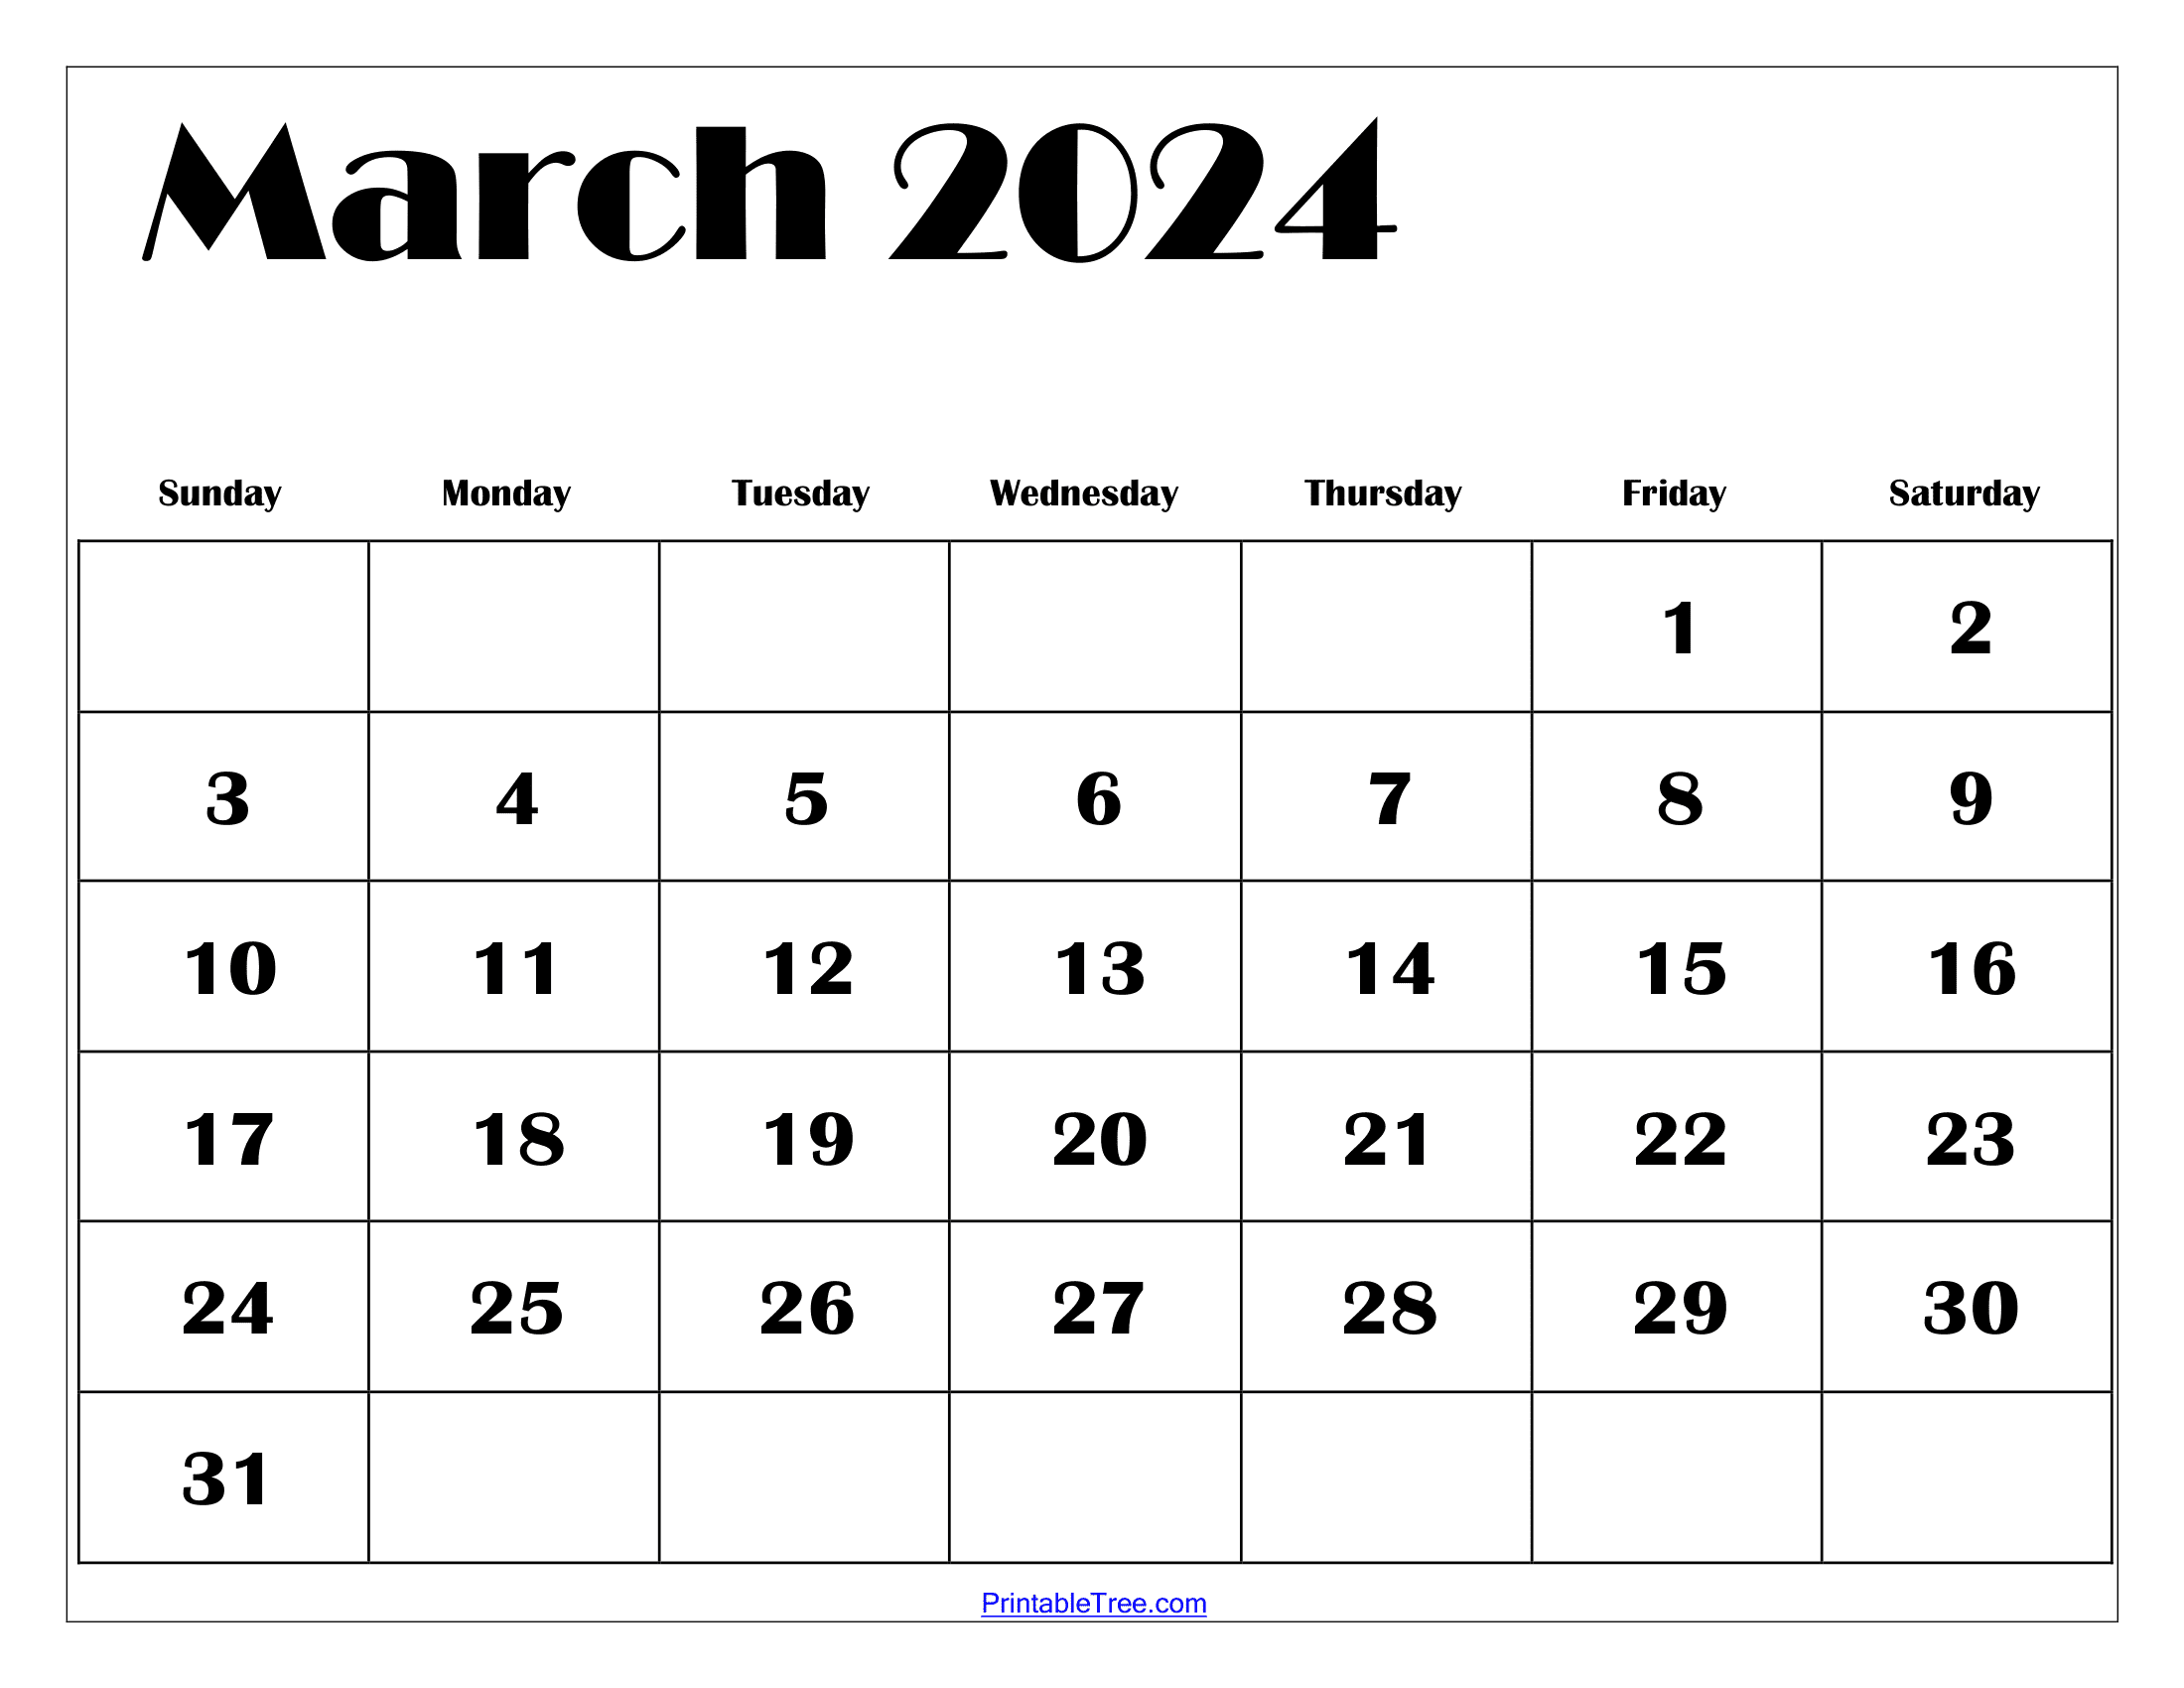 March 2024 Calendar Printable Pdf With Holidays Template Free for Free Printable Calendar March 2024